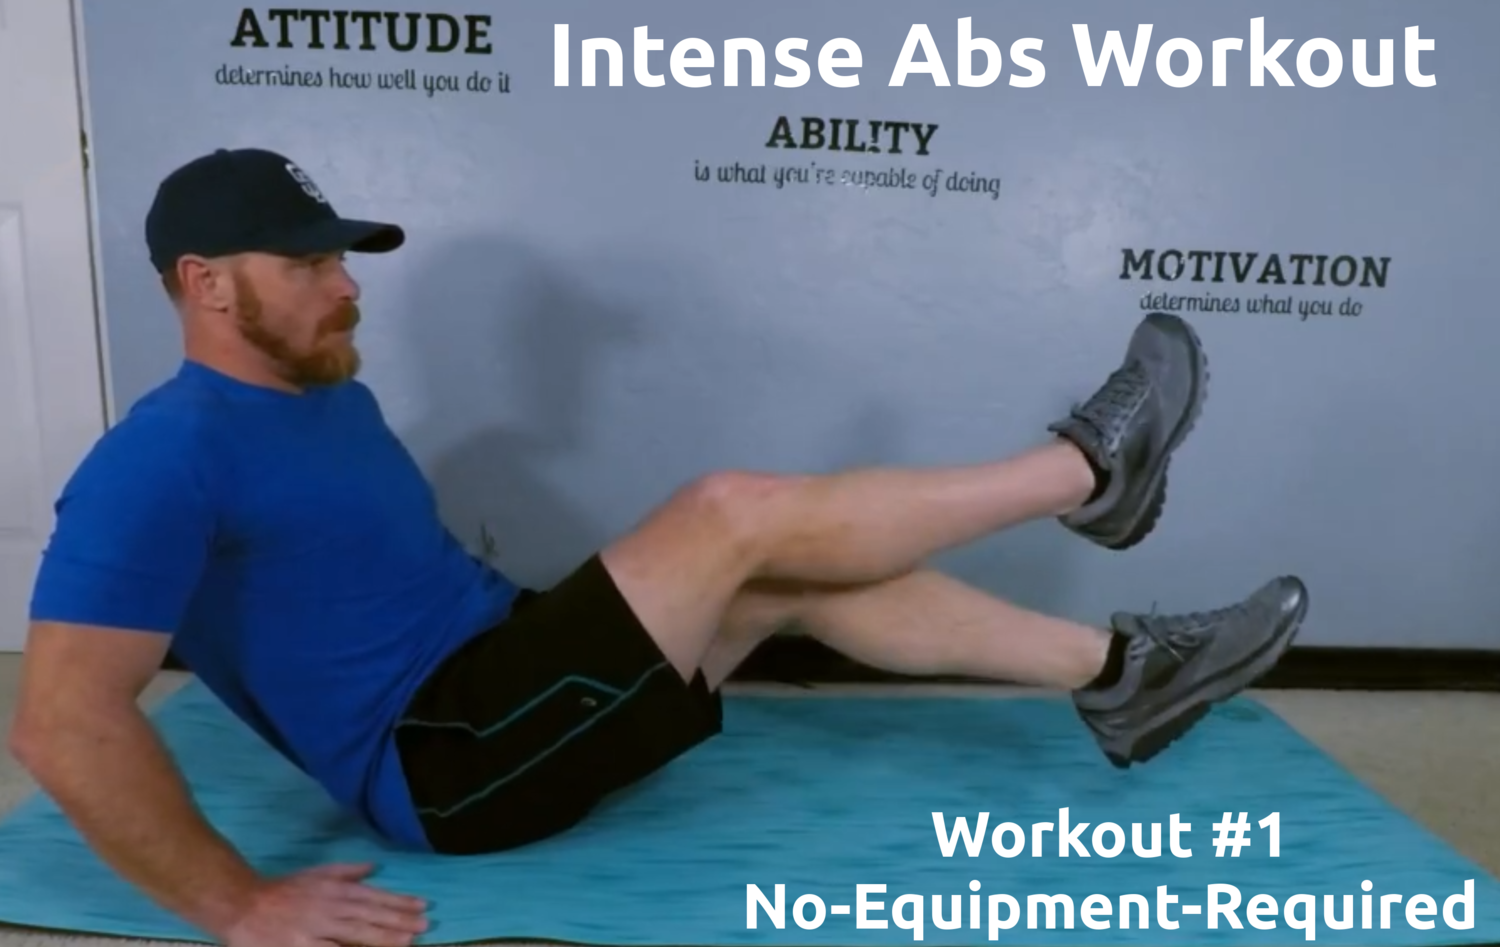 Intense Abs Workout 1 Dale Maynor Fitness Training